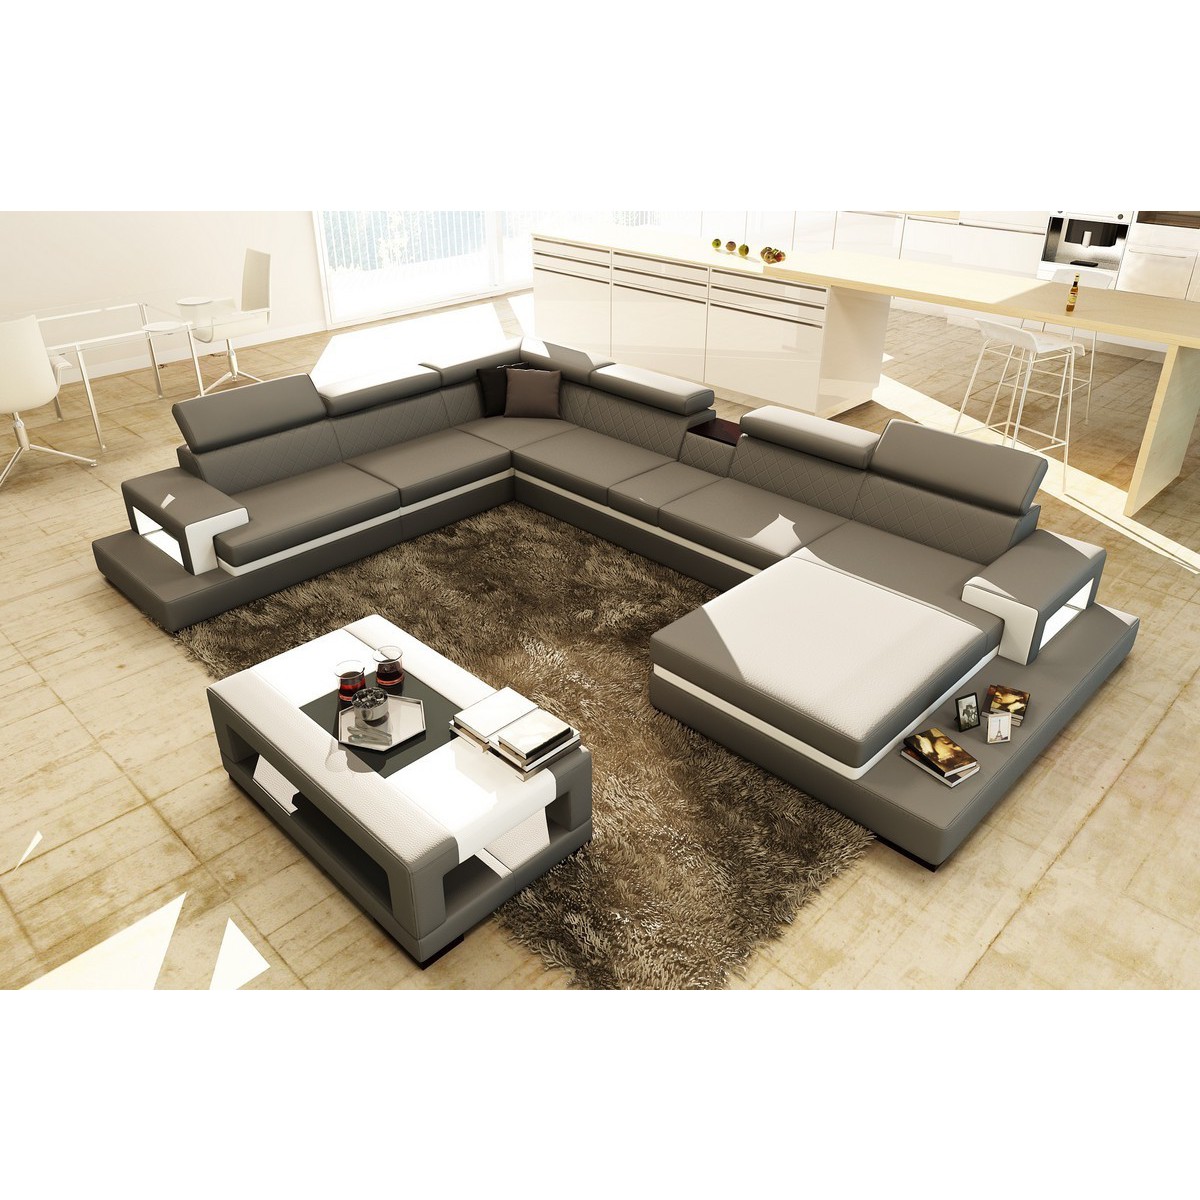 White Leather Sectional Sofa, Modern Italian Leather Sectional